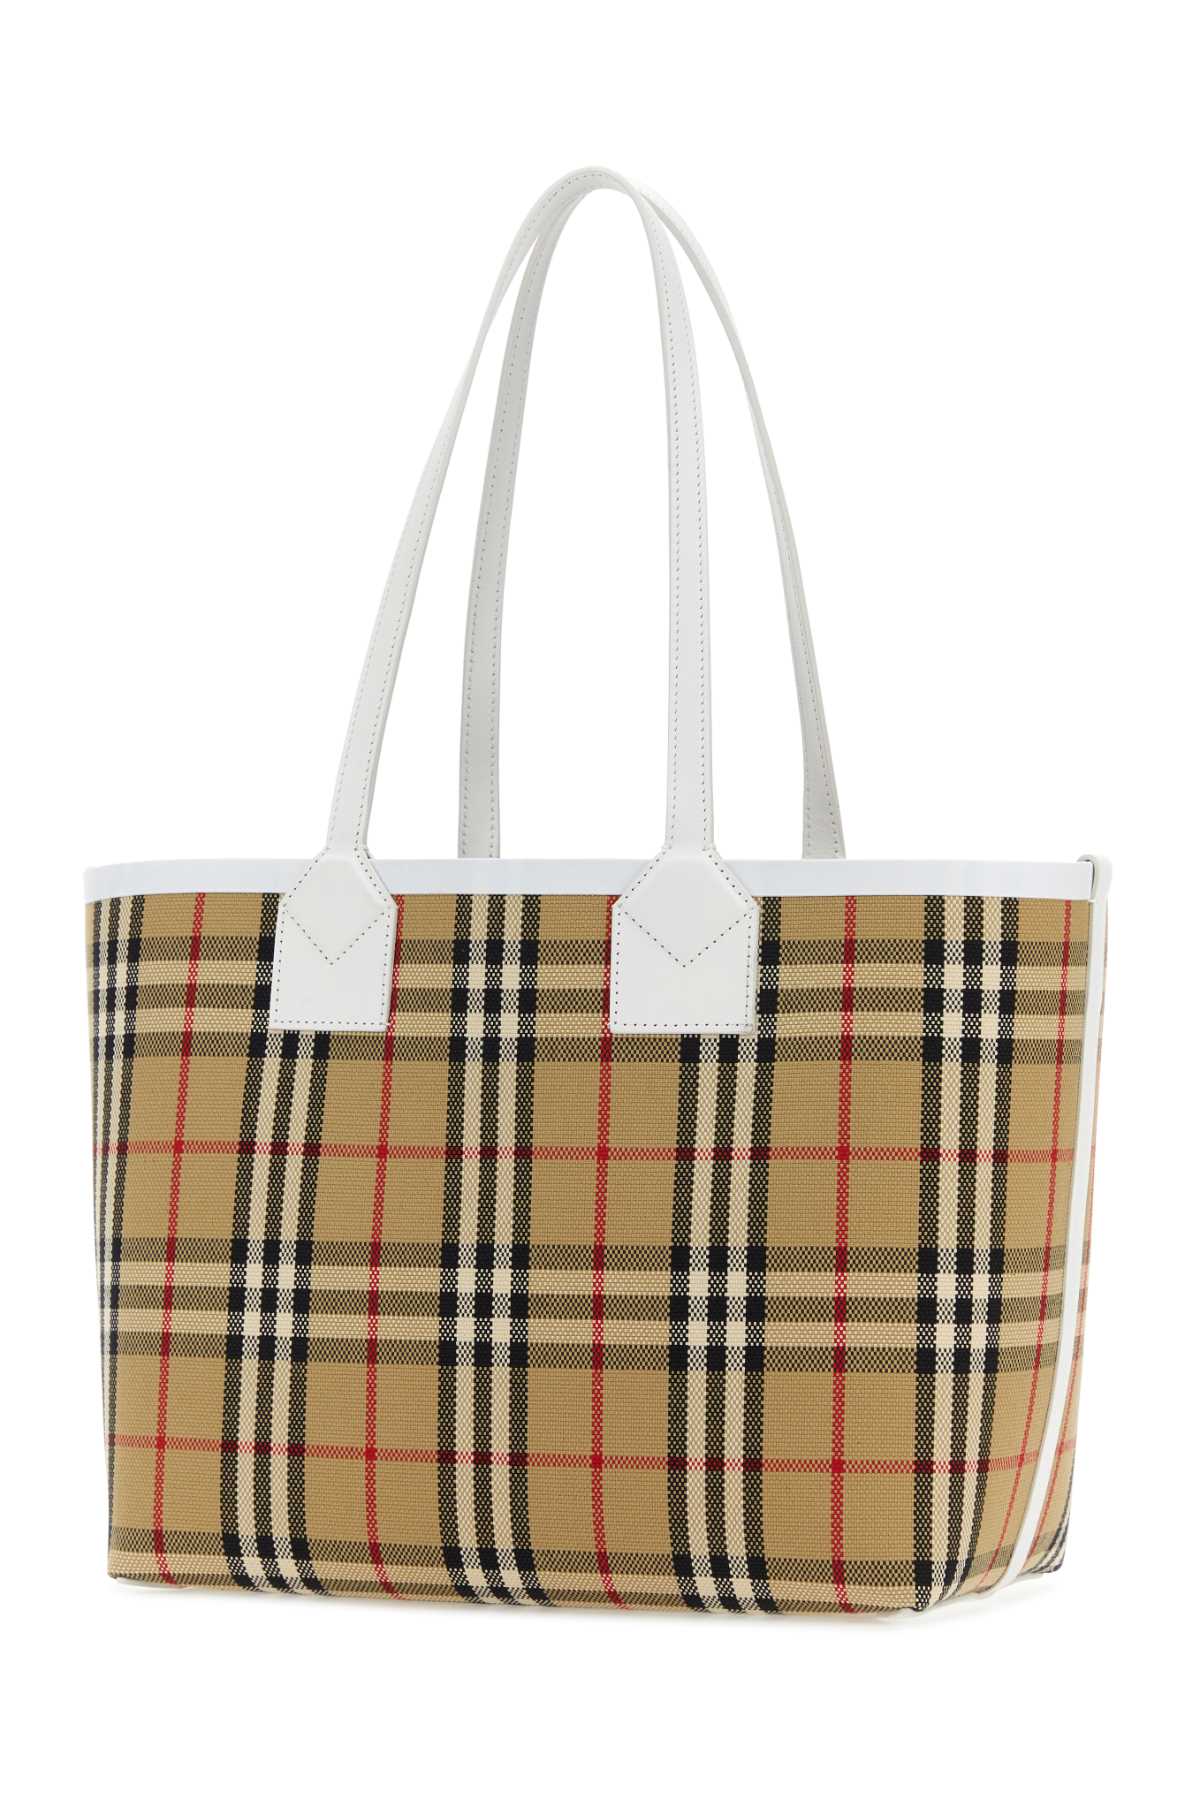 Burberry Embroidered Canvas Small London Shopping Bag In Vintagecheckwhite